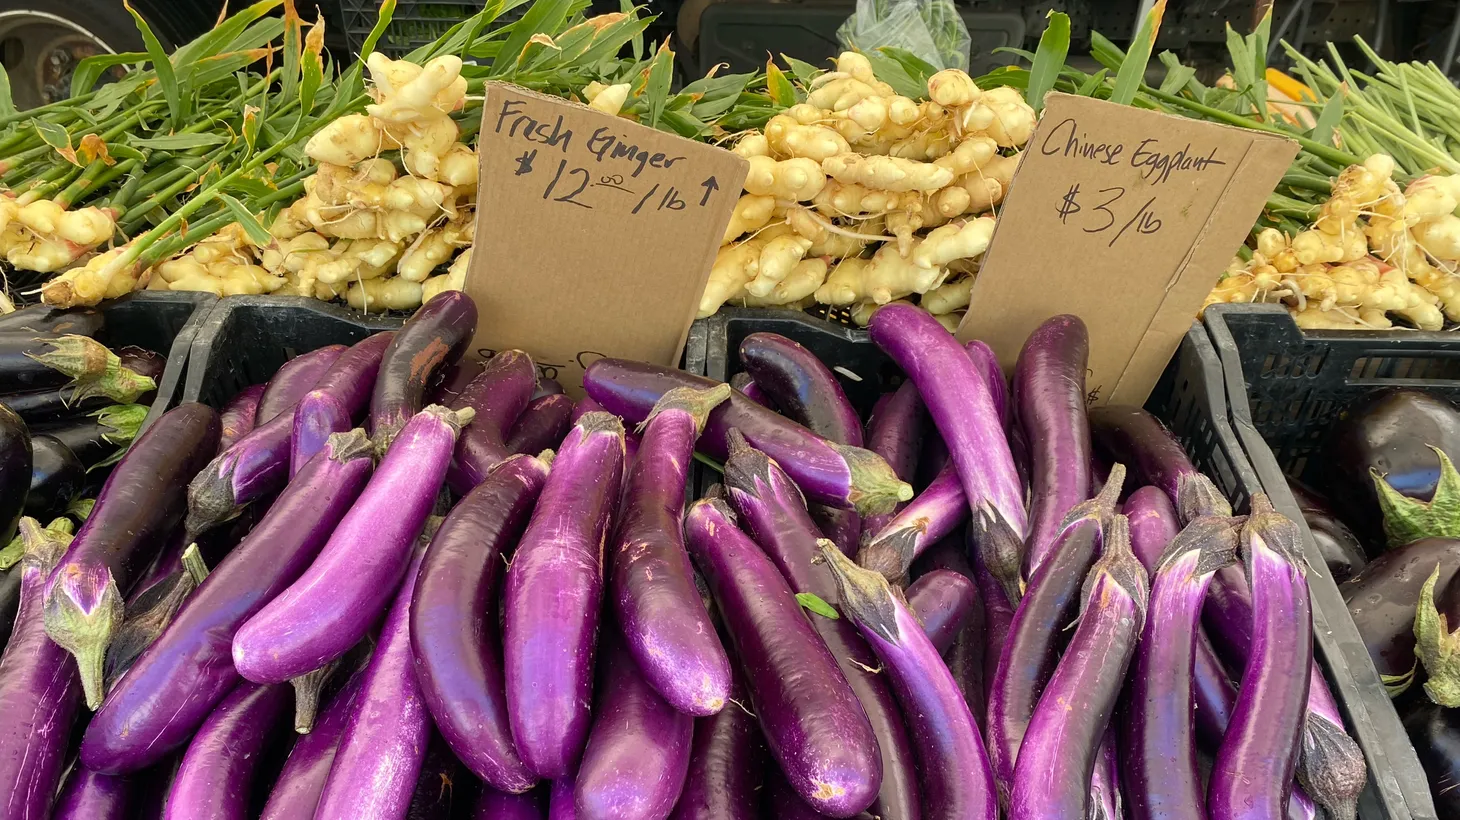 Chinese eggplant along with Fresno Evergreen from Her Produce makes its way down from Central California to the Santa Monica Farmer’s Market each week.